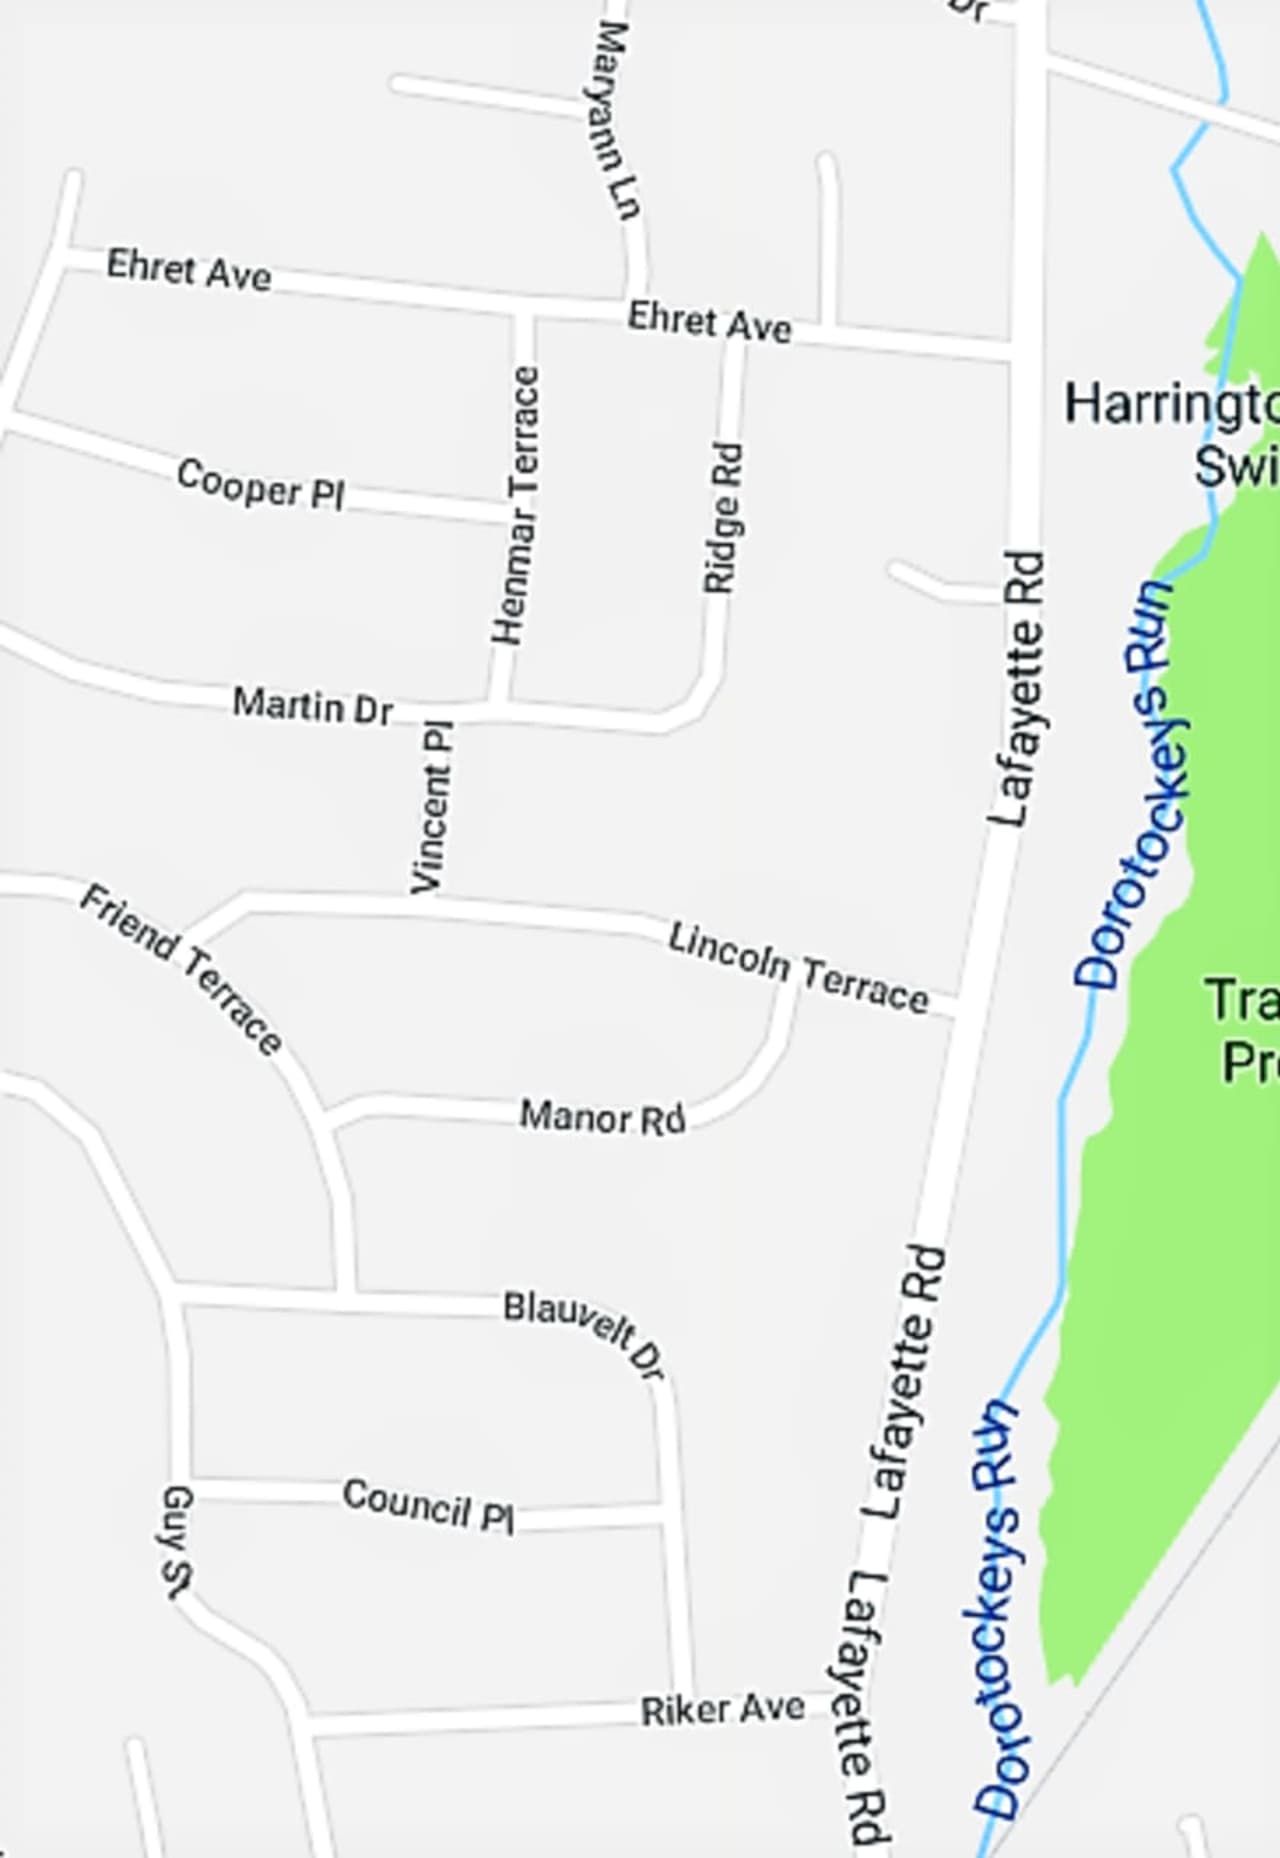 The Harrington Park vehicles were stolen or broken into over the weekend in the area outlined on this map.